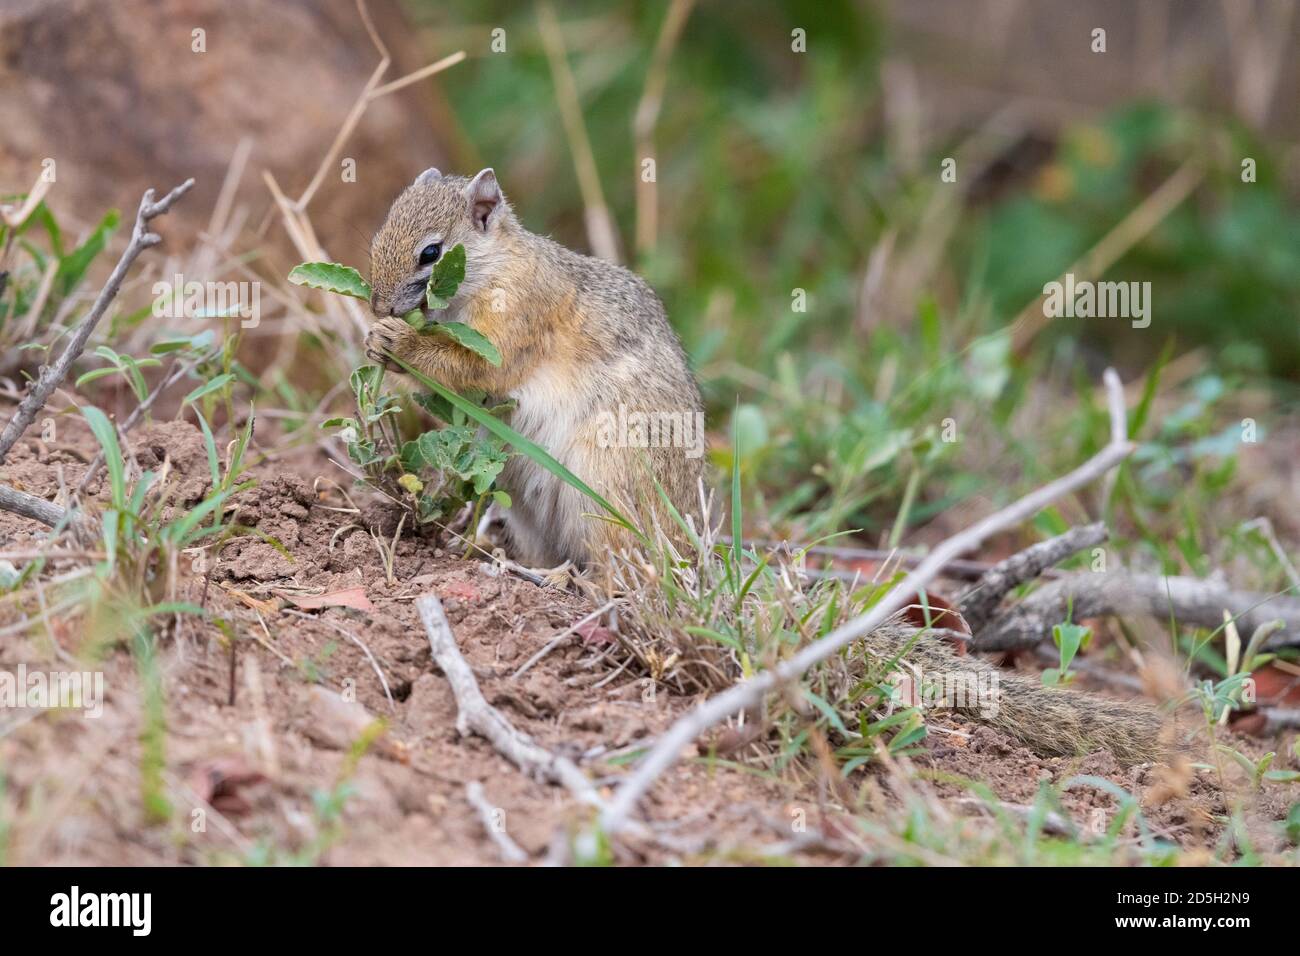 Smith's Bush Squirrel (Paraxerus cepapi), side view of an adult feeding on a plant, Mpumalanga, South Africa Stock Photo